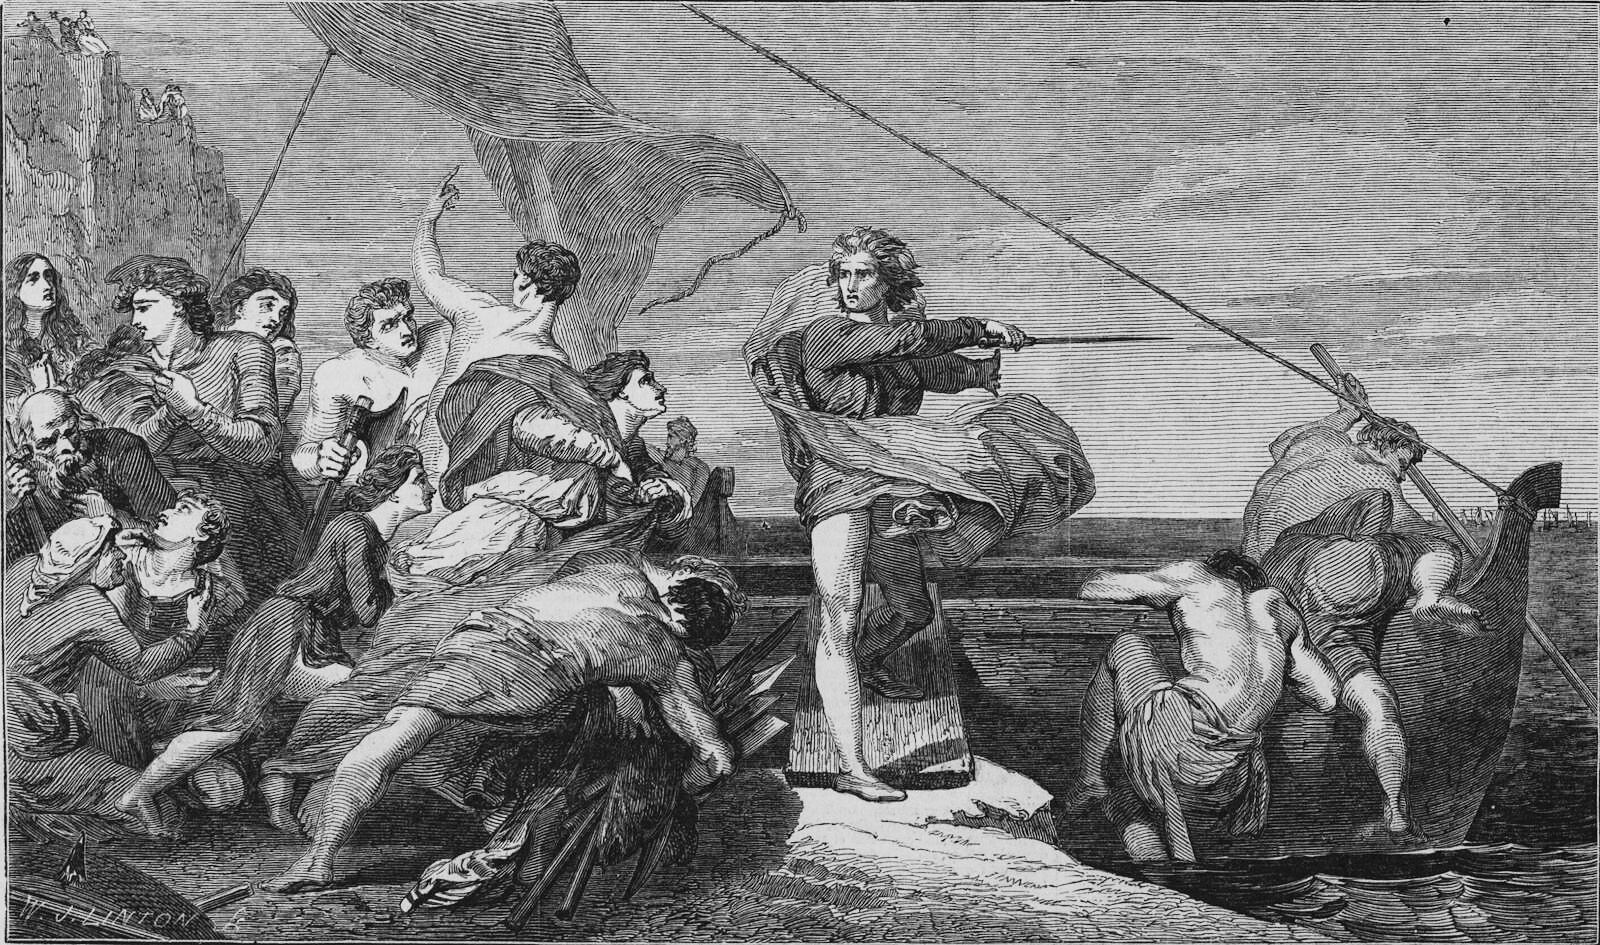 ‘Alfred Inciting the Saxons to Prevent the Landing of the Danes' by George Frederic Watts, reproduced in the Illustrated London News, 17 July 1847. Public Domain. 